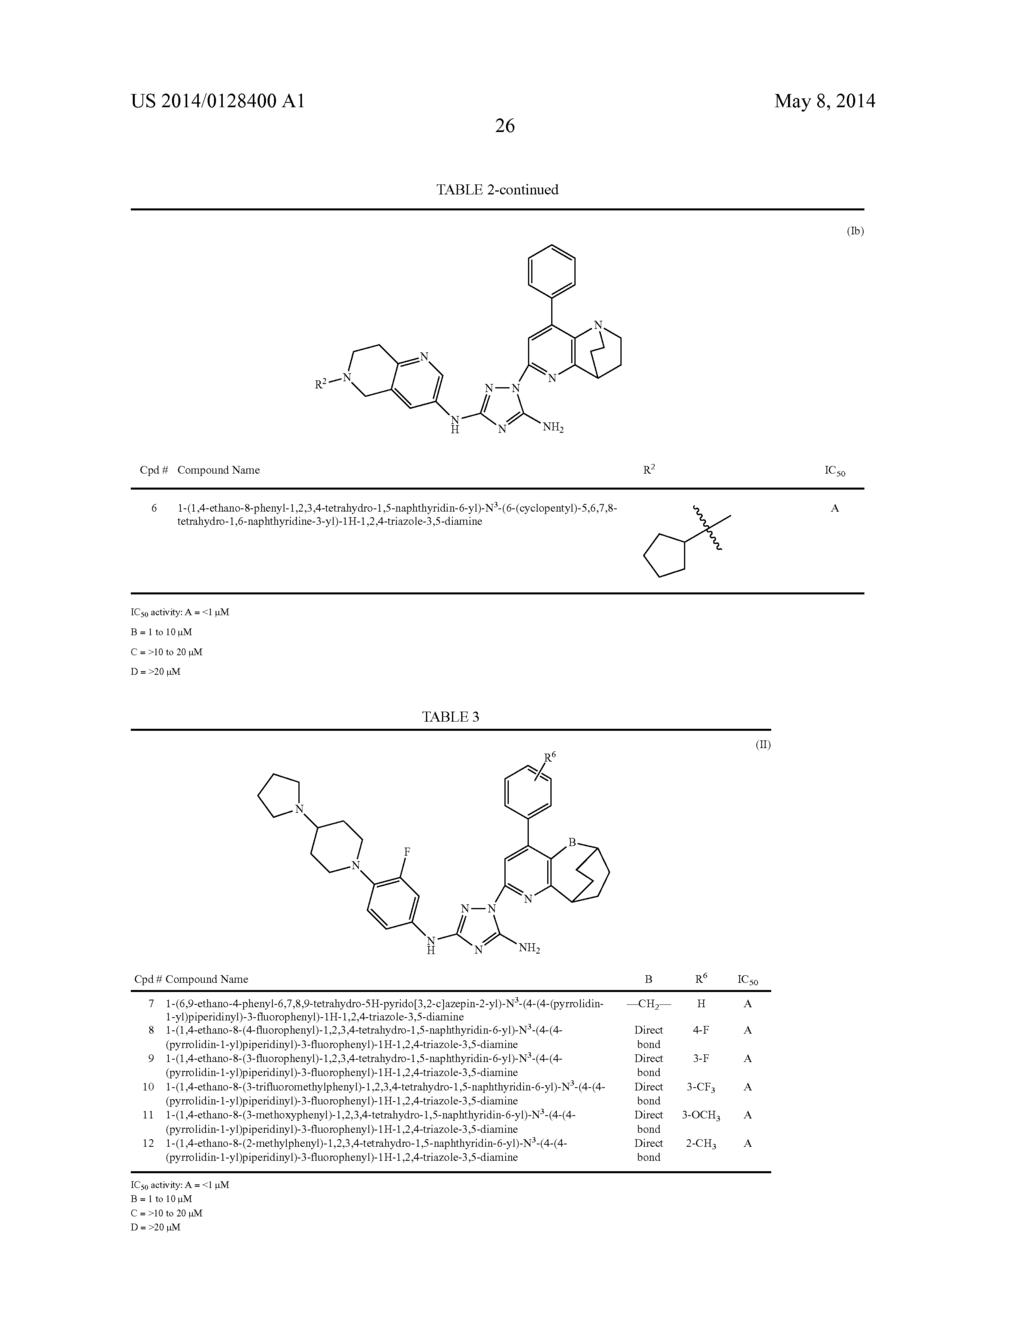 BRIDGED BICYCLIC HETEROARYL SUBSTITUTED TRIAZOLES USEFUL AS AXL INHIBITORS - diagram, schematic, and image 27